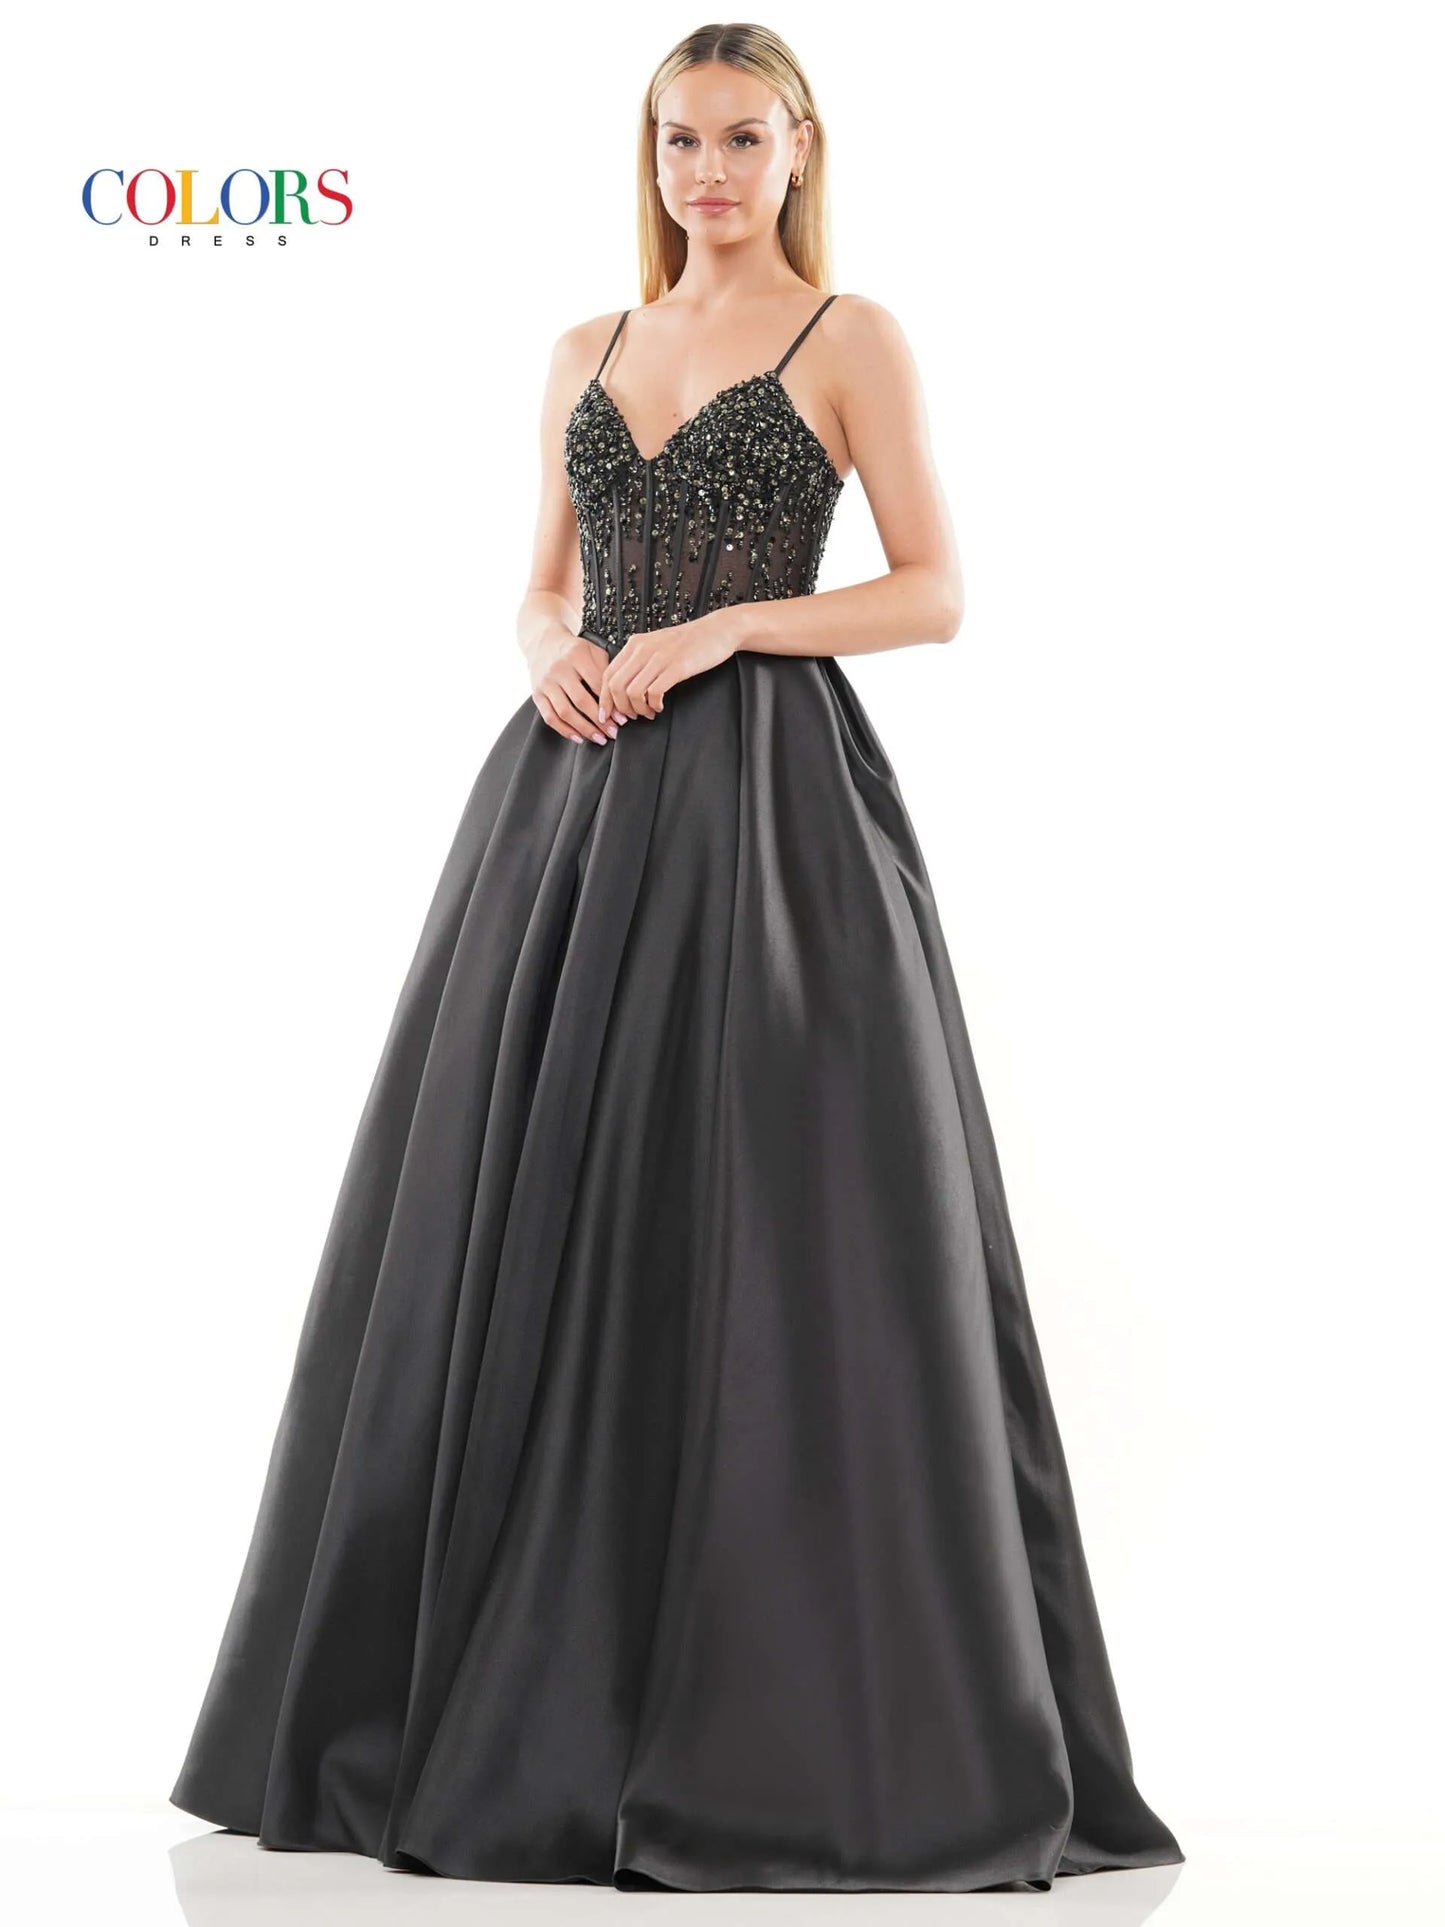 Colors Dress 3244 is a stunning long mikado ballgown prom dress that exudes elegance and sophistication. It features a v-neck and a sheer corset with boning and beaded details for a slimming silhouette. The intricate beading throughout the gown adds a touch of sparkle. Perfect for formal occasions.  Sizes: 0,2,4,6,8,10,12,14,16,18,20  Colors: Black, Red, Mint, Blueberry